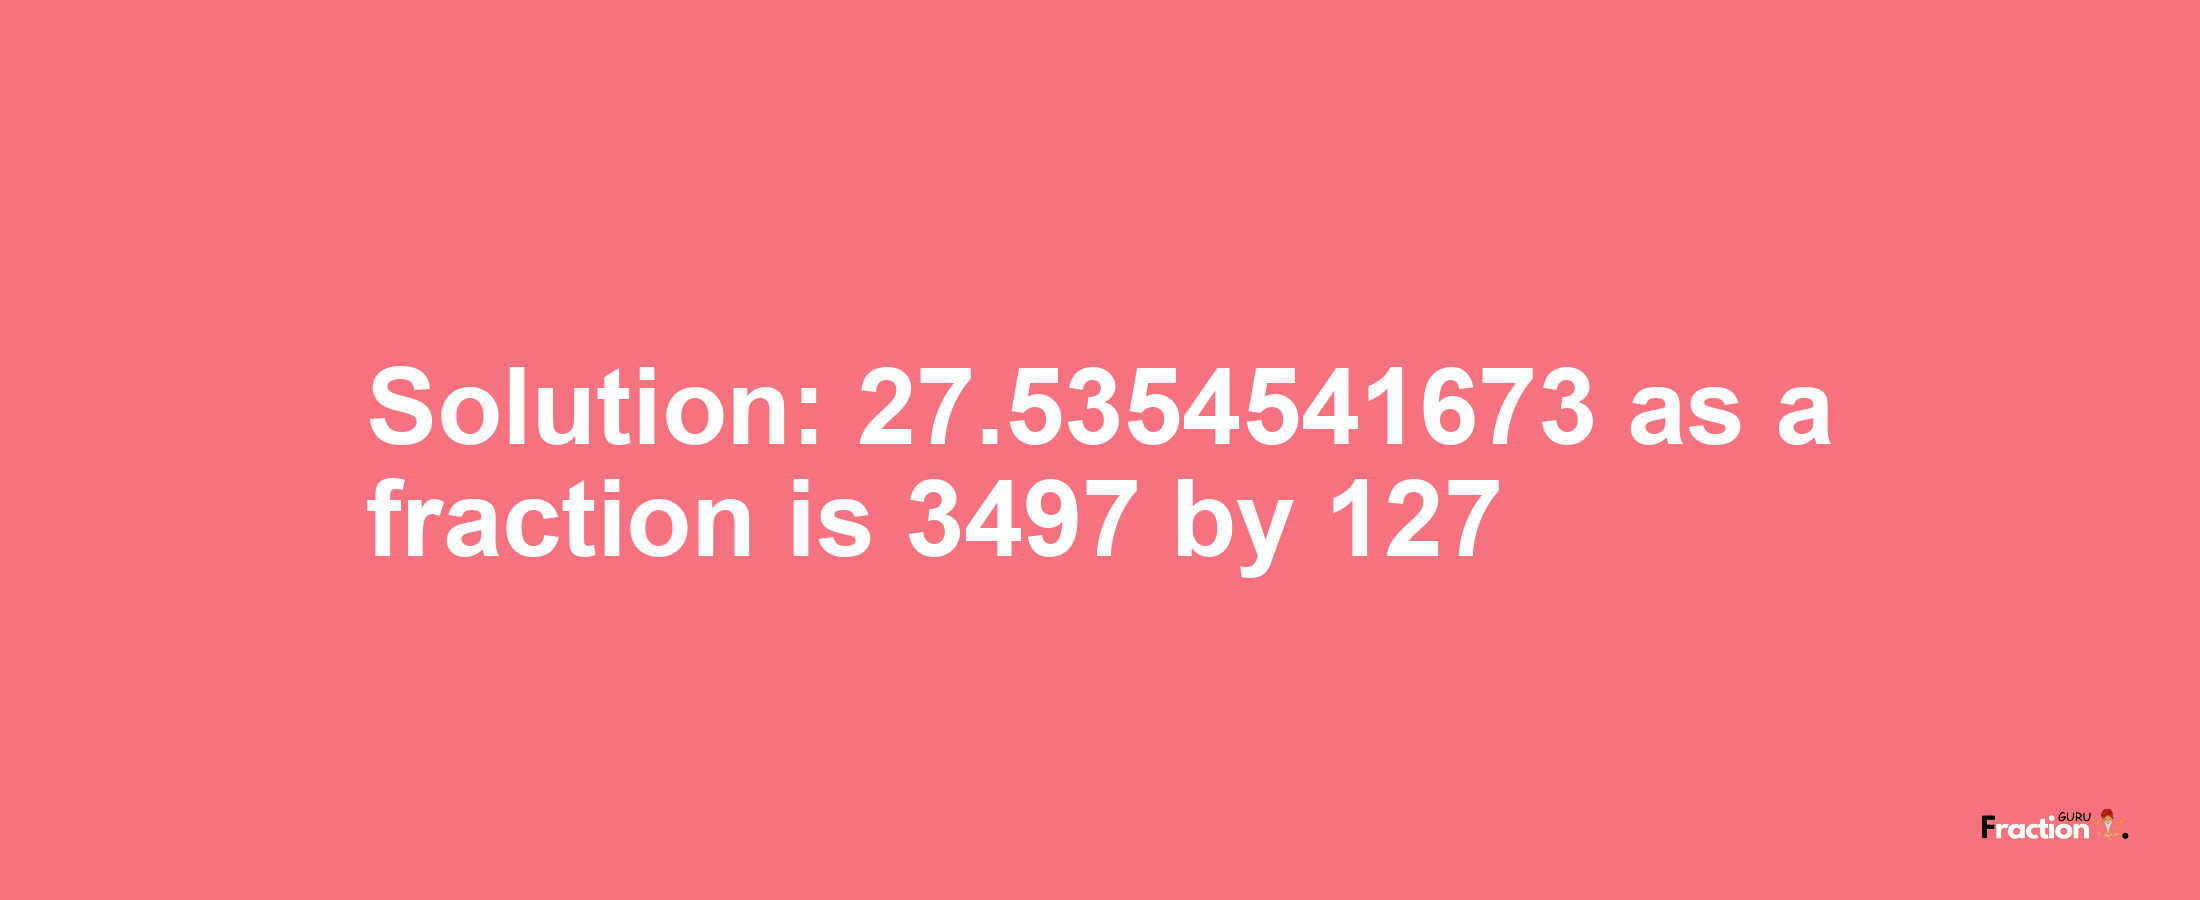 Solution:27.5354541673 as a fraction is 3497/127